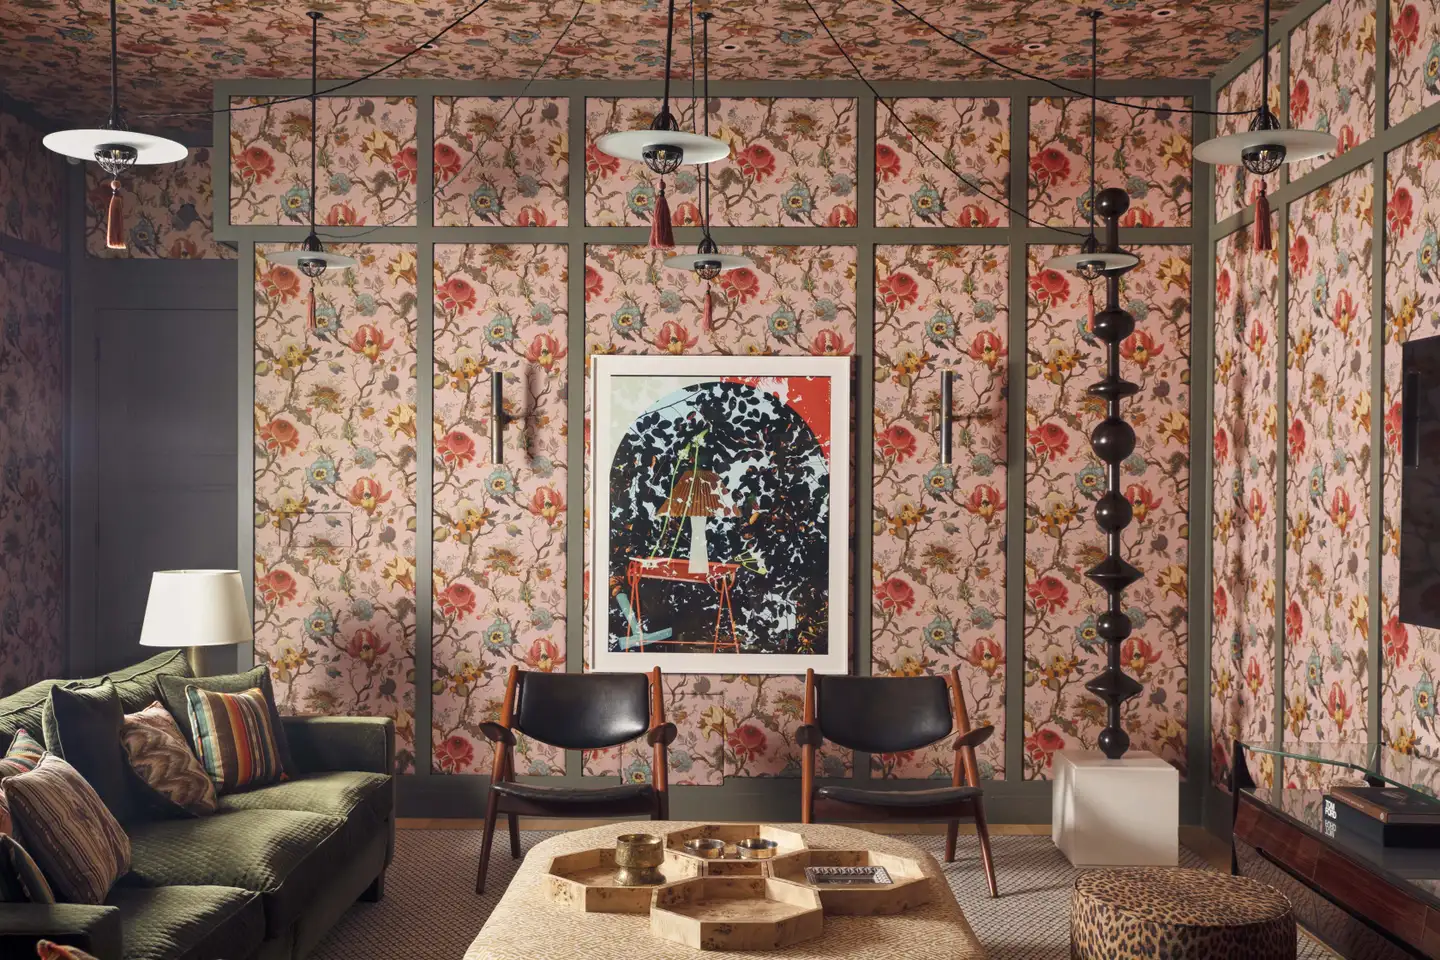 Living room with a flowered fabric covered wall